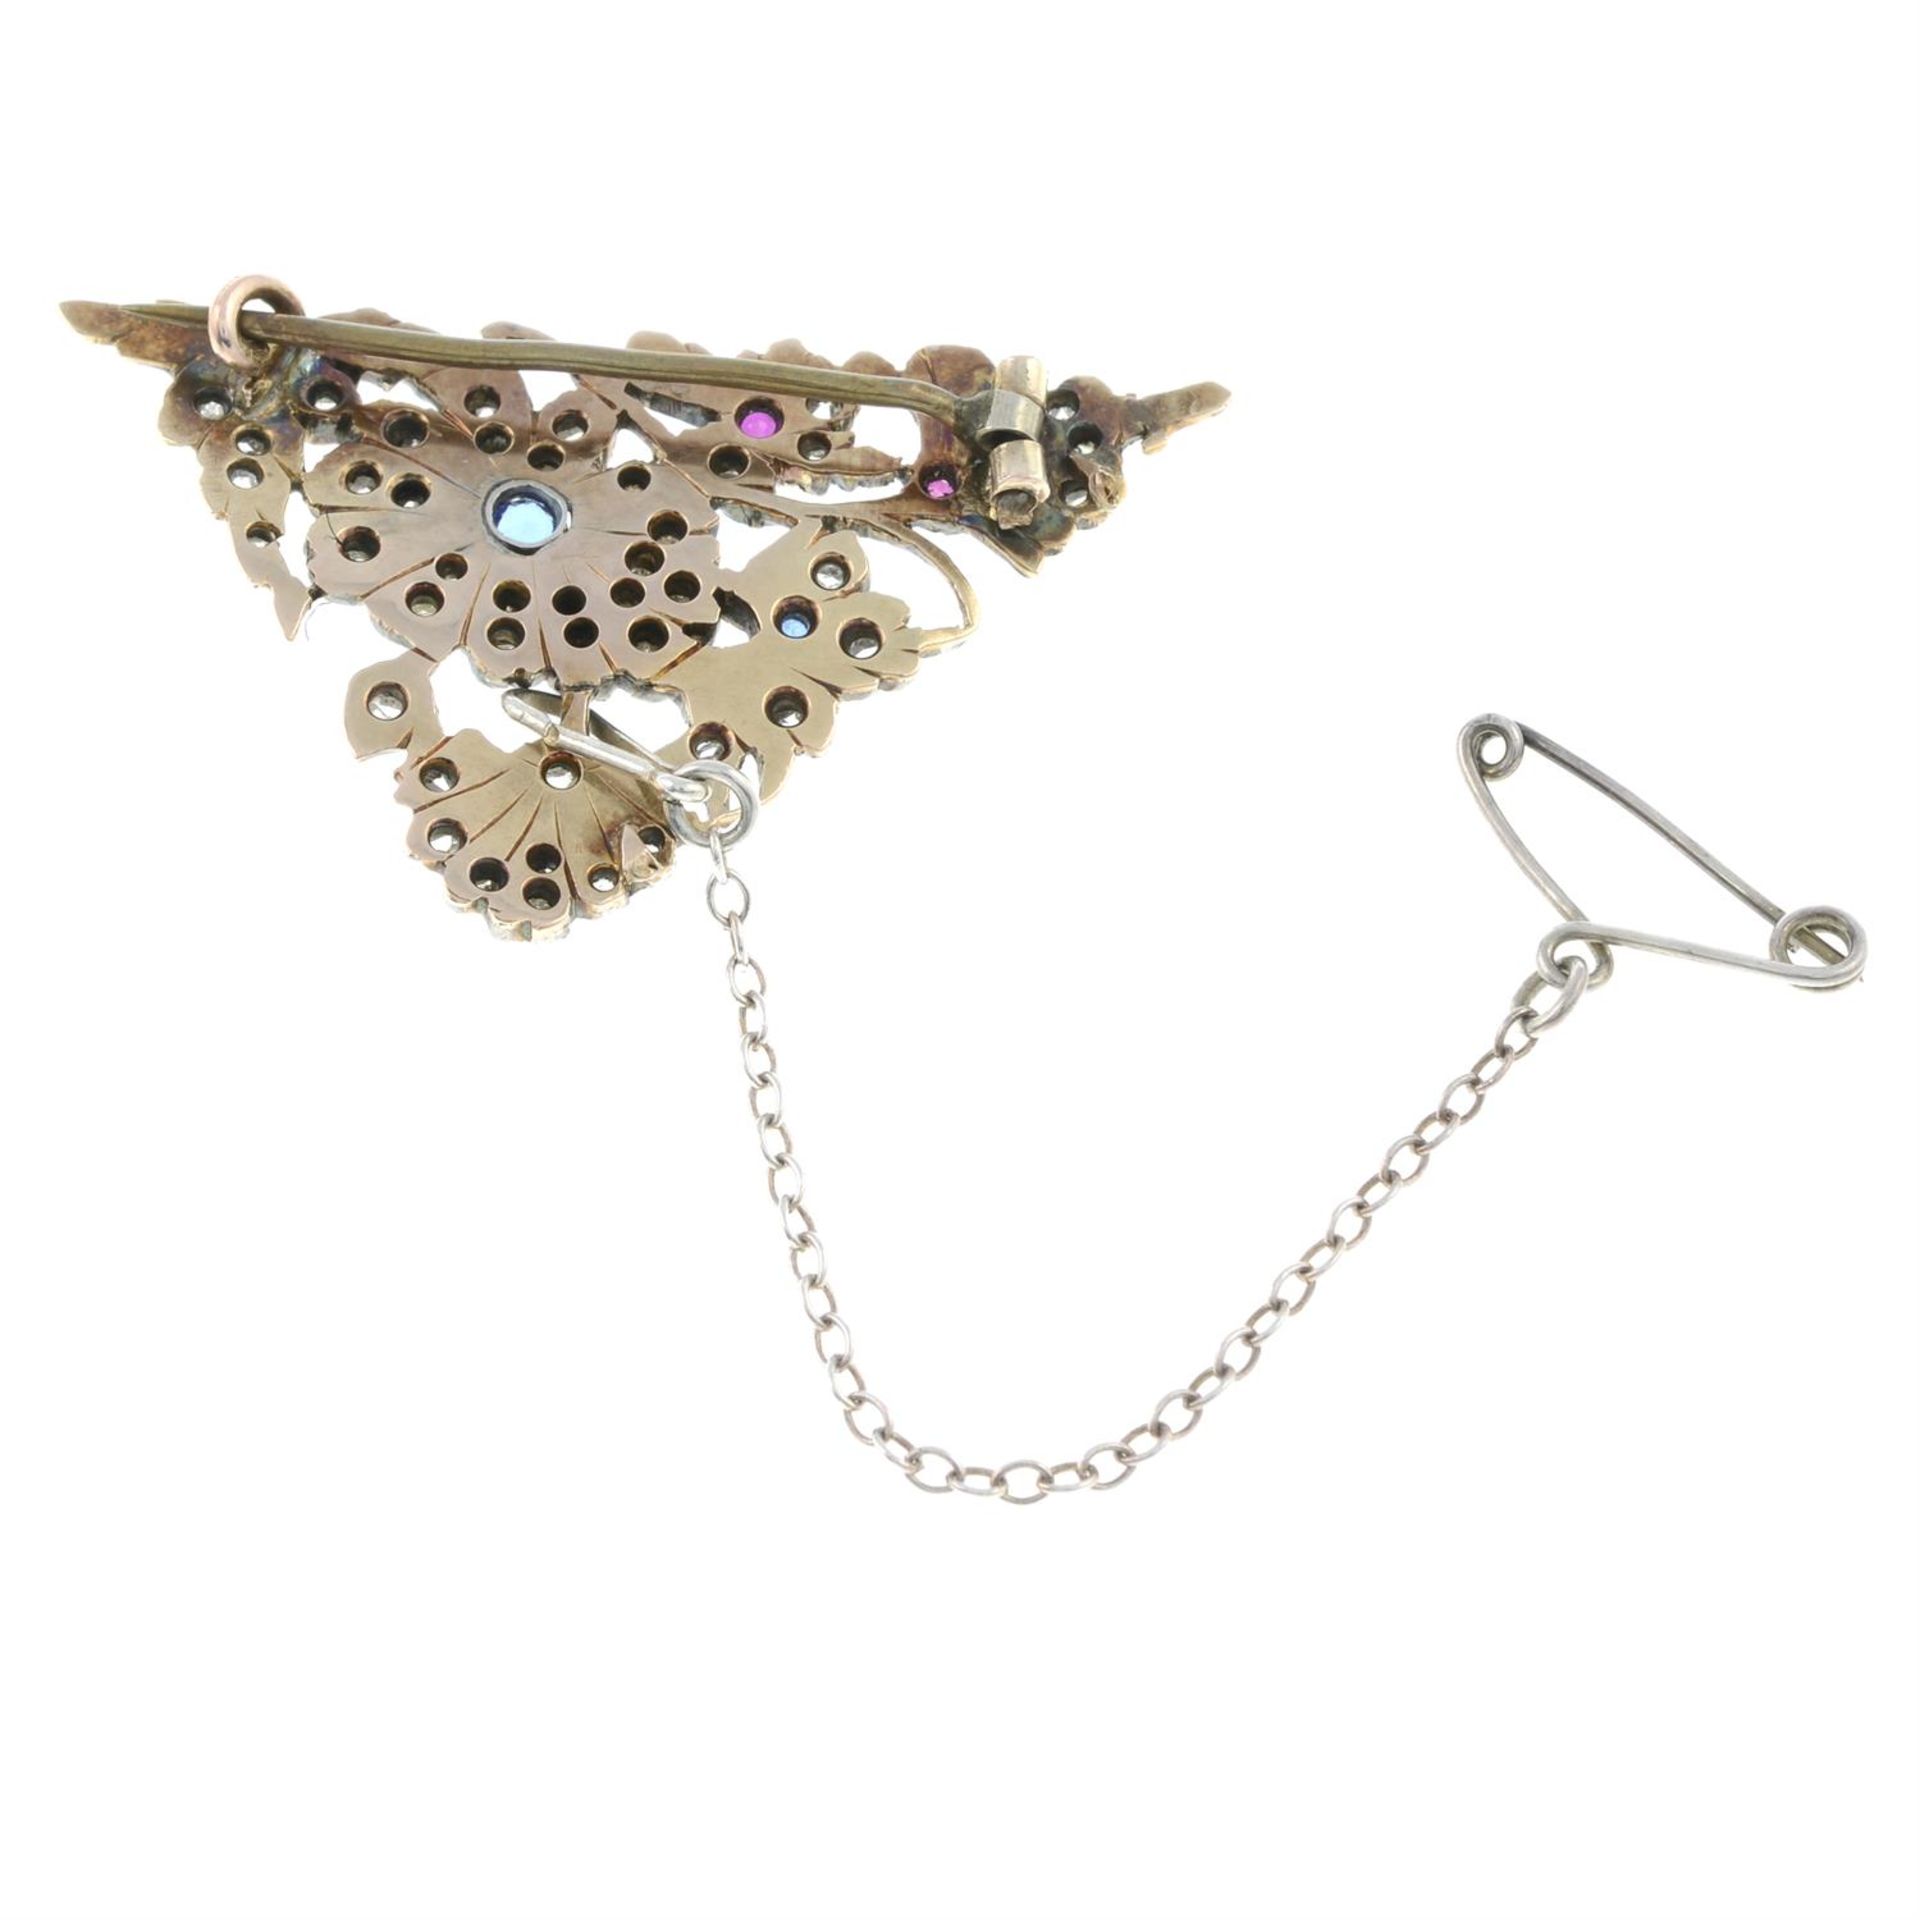 An early 20th century rose-cut diamond and gem-set floral brooch. - Image 2 of 2